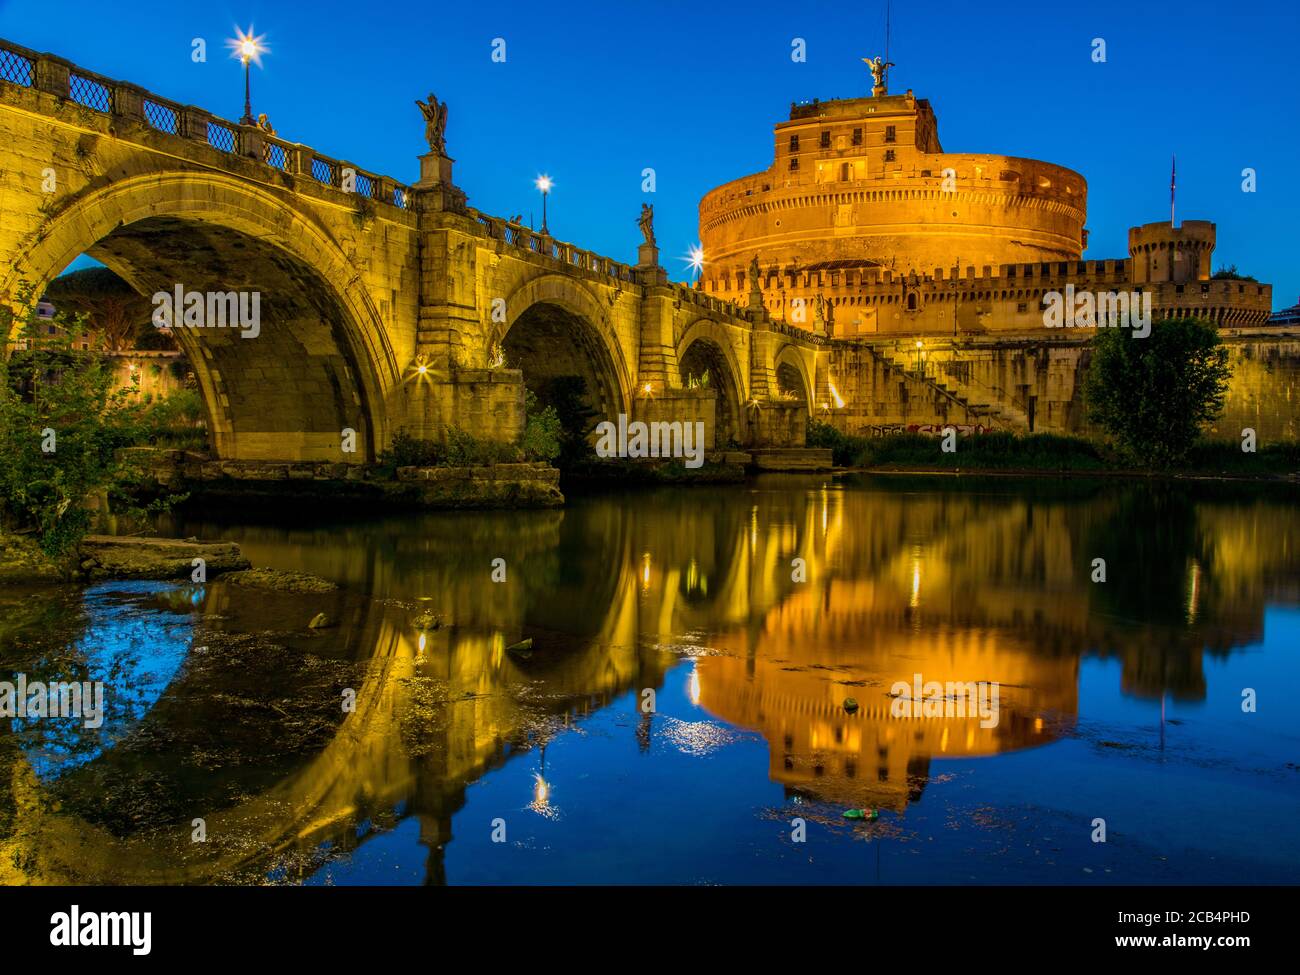 Castel Sant'Angelo, with the St. Angelo Bridge, along the River Tiber in Rome, Italy Stock Photo